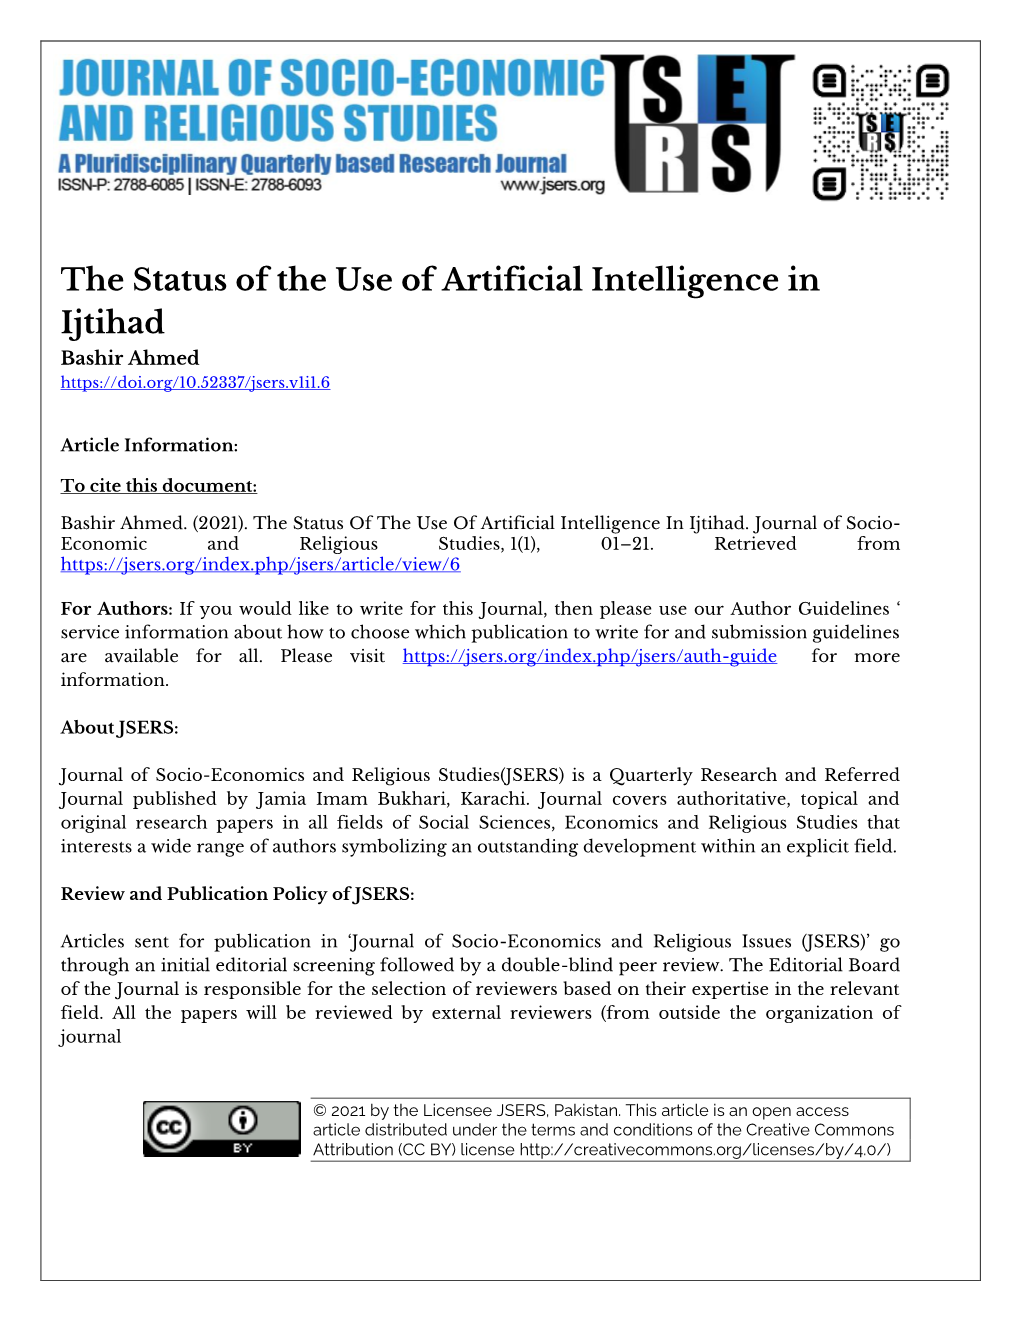 The Status of the Use of Artificial Intelligence in Ijtihad Bashir Ahmed